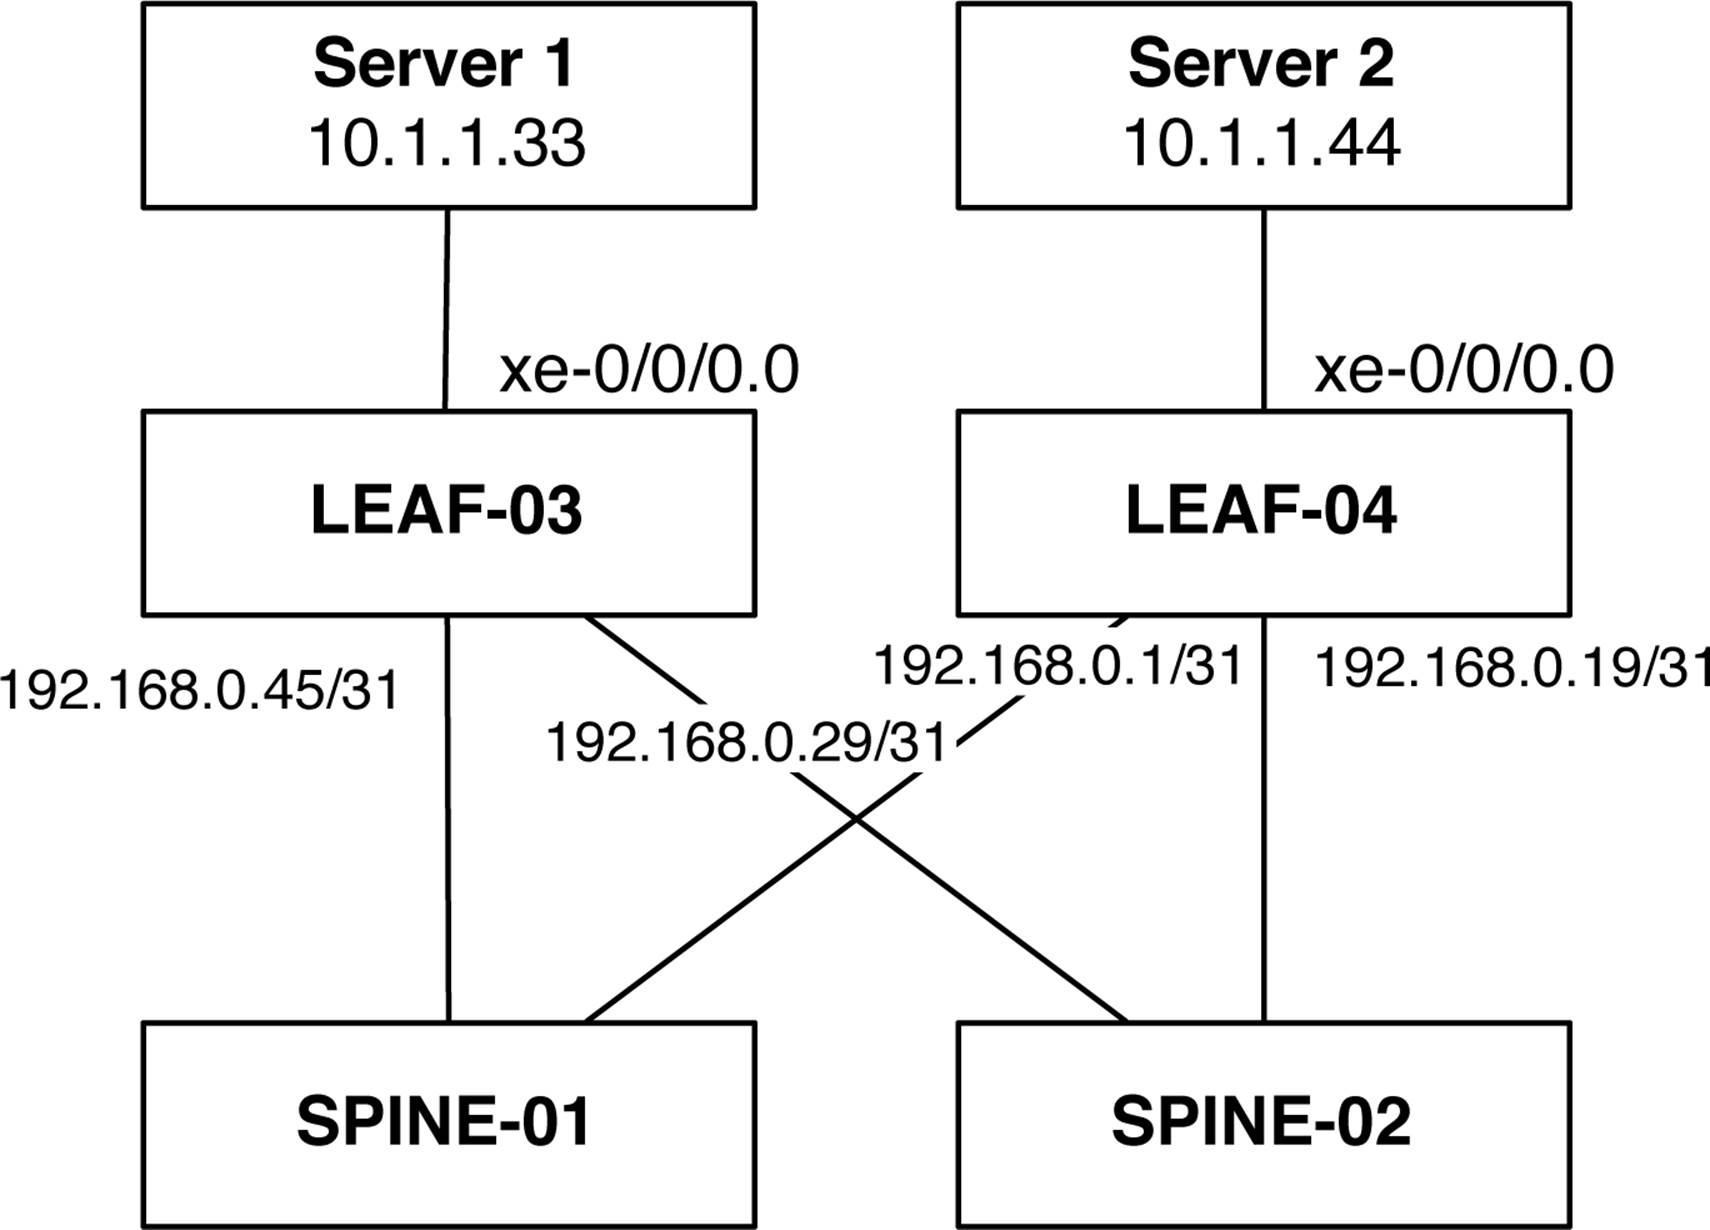 The Multicast VTEP topology